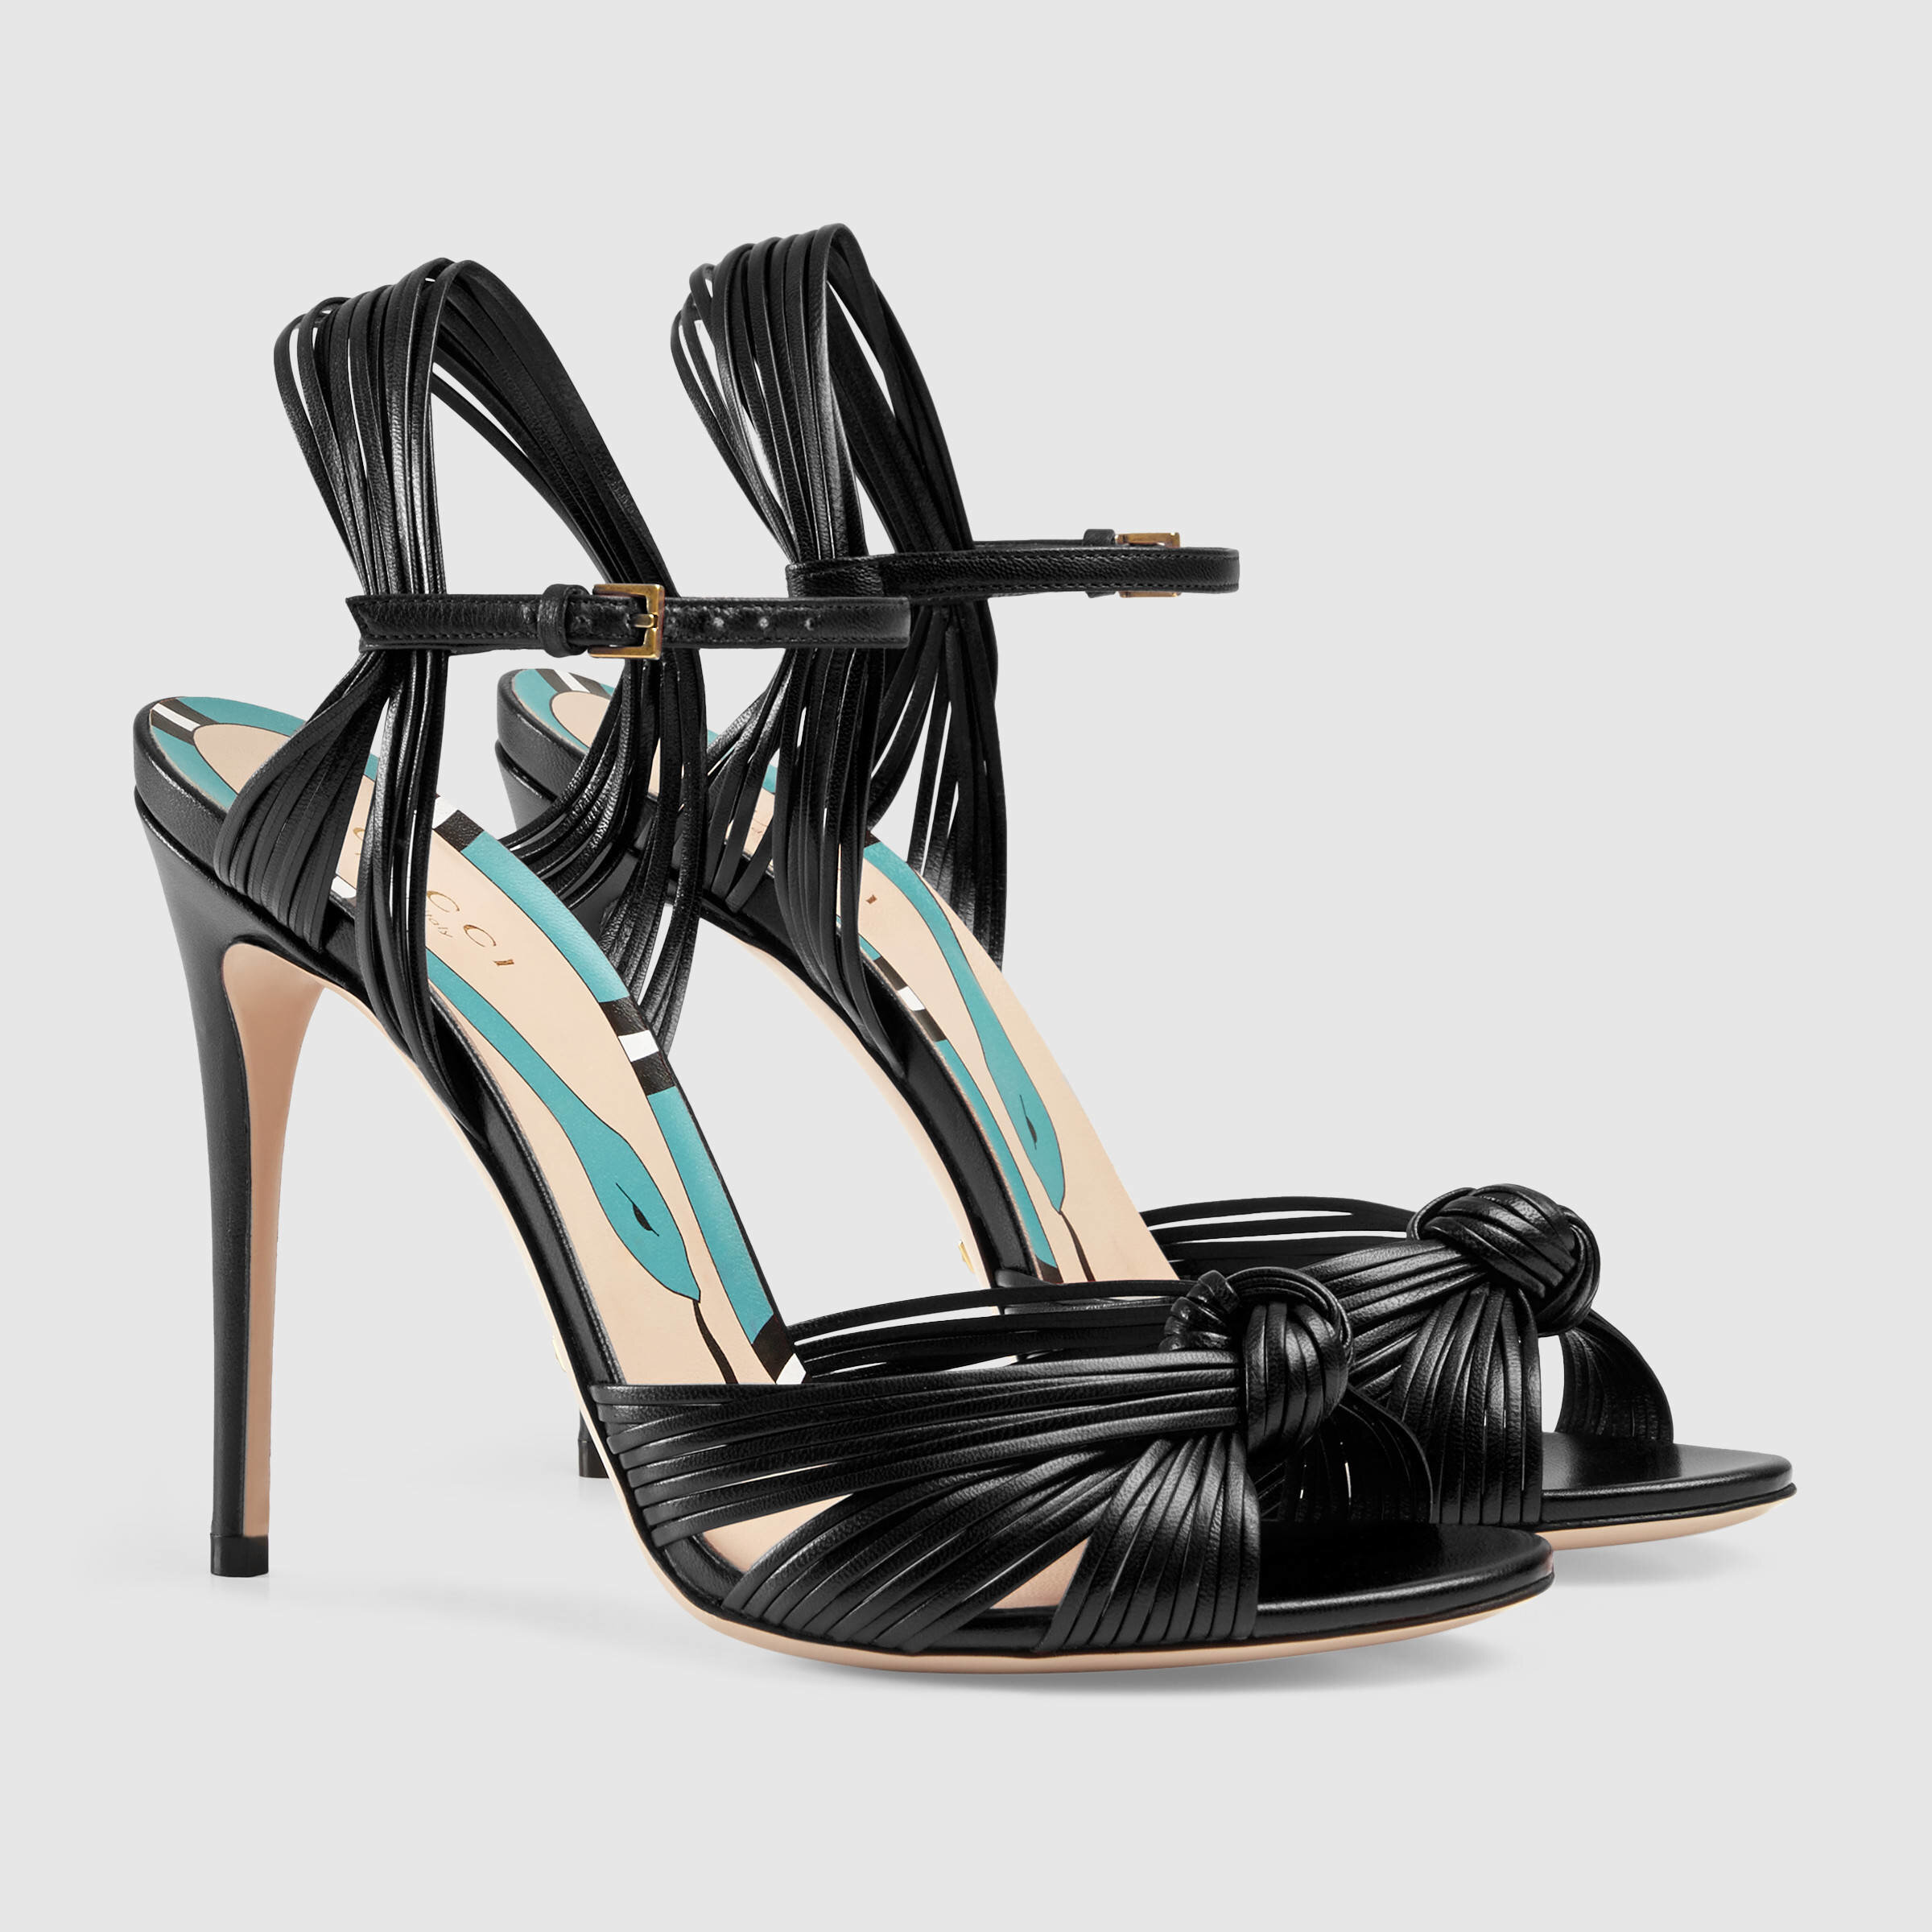 Gucci Allie Leather Knot Sandals in Black.jpg